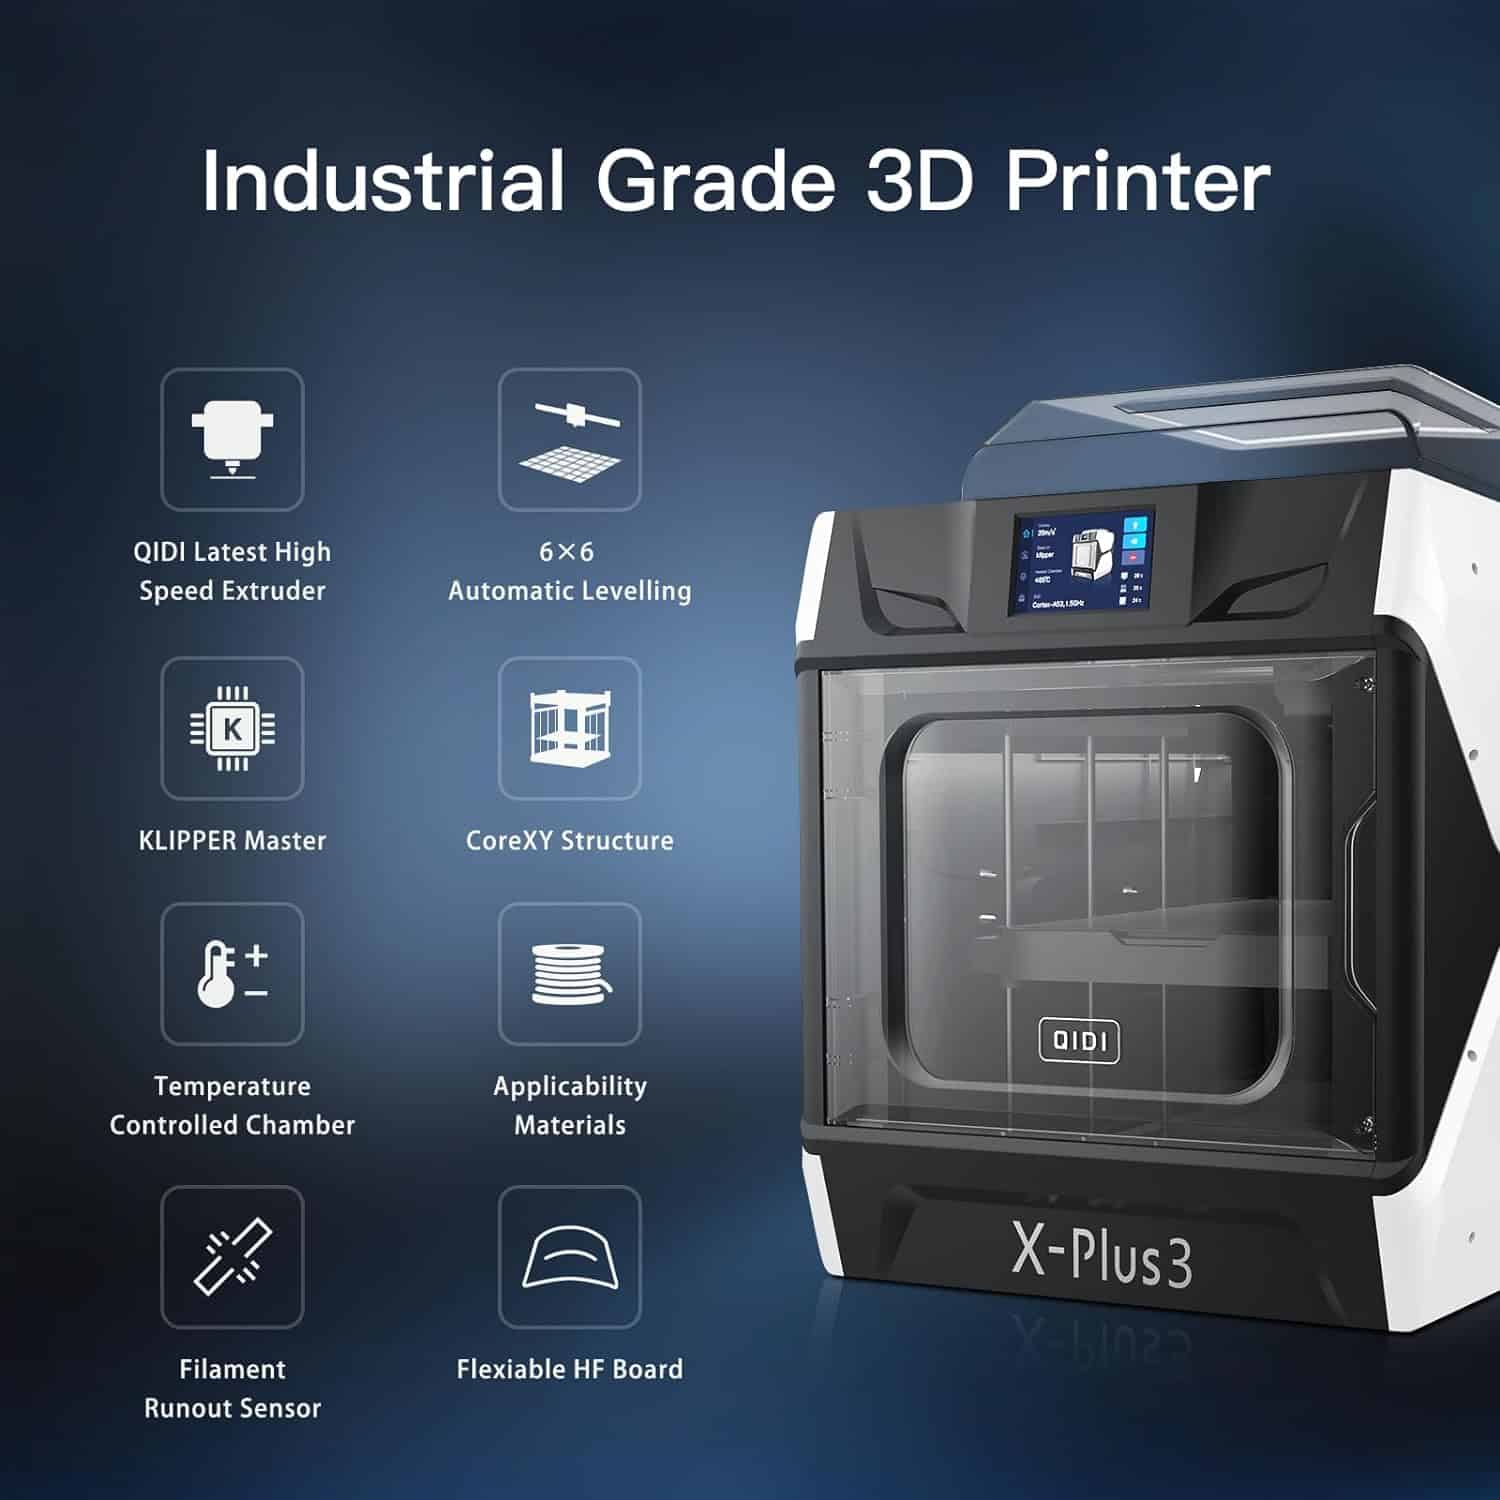 r-qidi-technology-x-plus3-3d-printers-fully-upgrade-600mms-industrial-grade-high-speed-3d-printer-acceleration-20000mms2-2